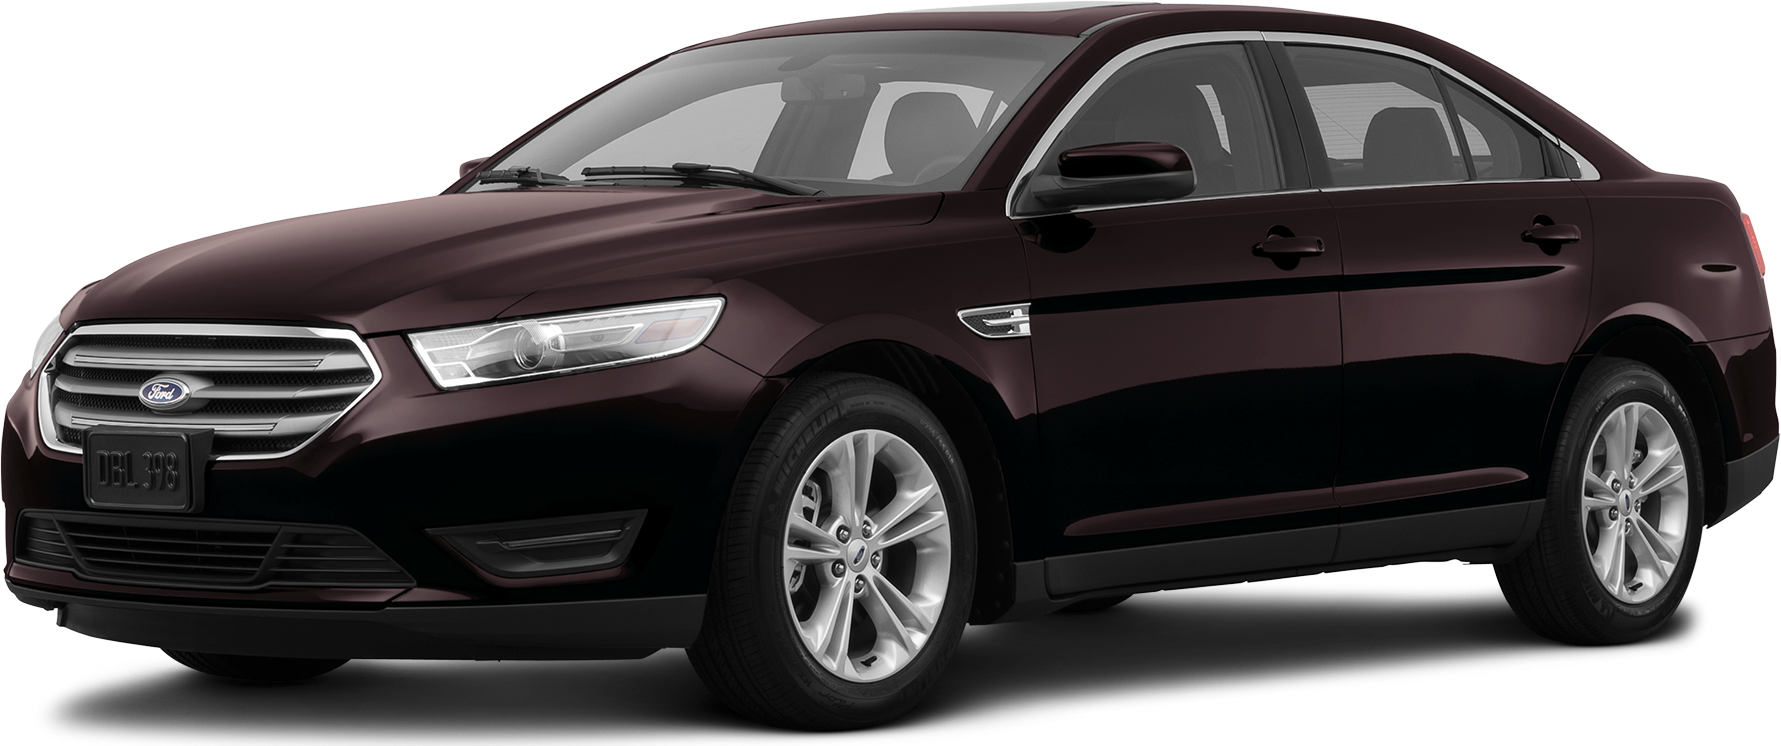 2013 Ford Taurus Values And Cars For Sale Kelley Blue Book